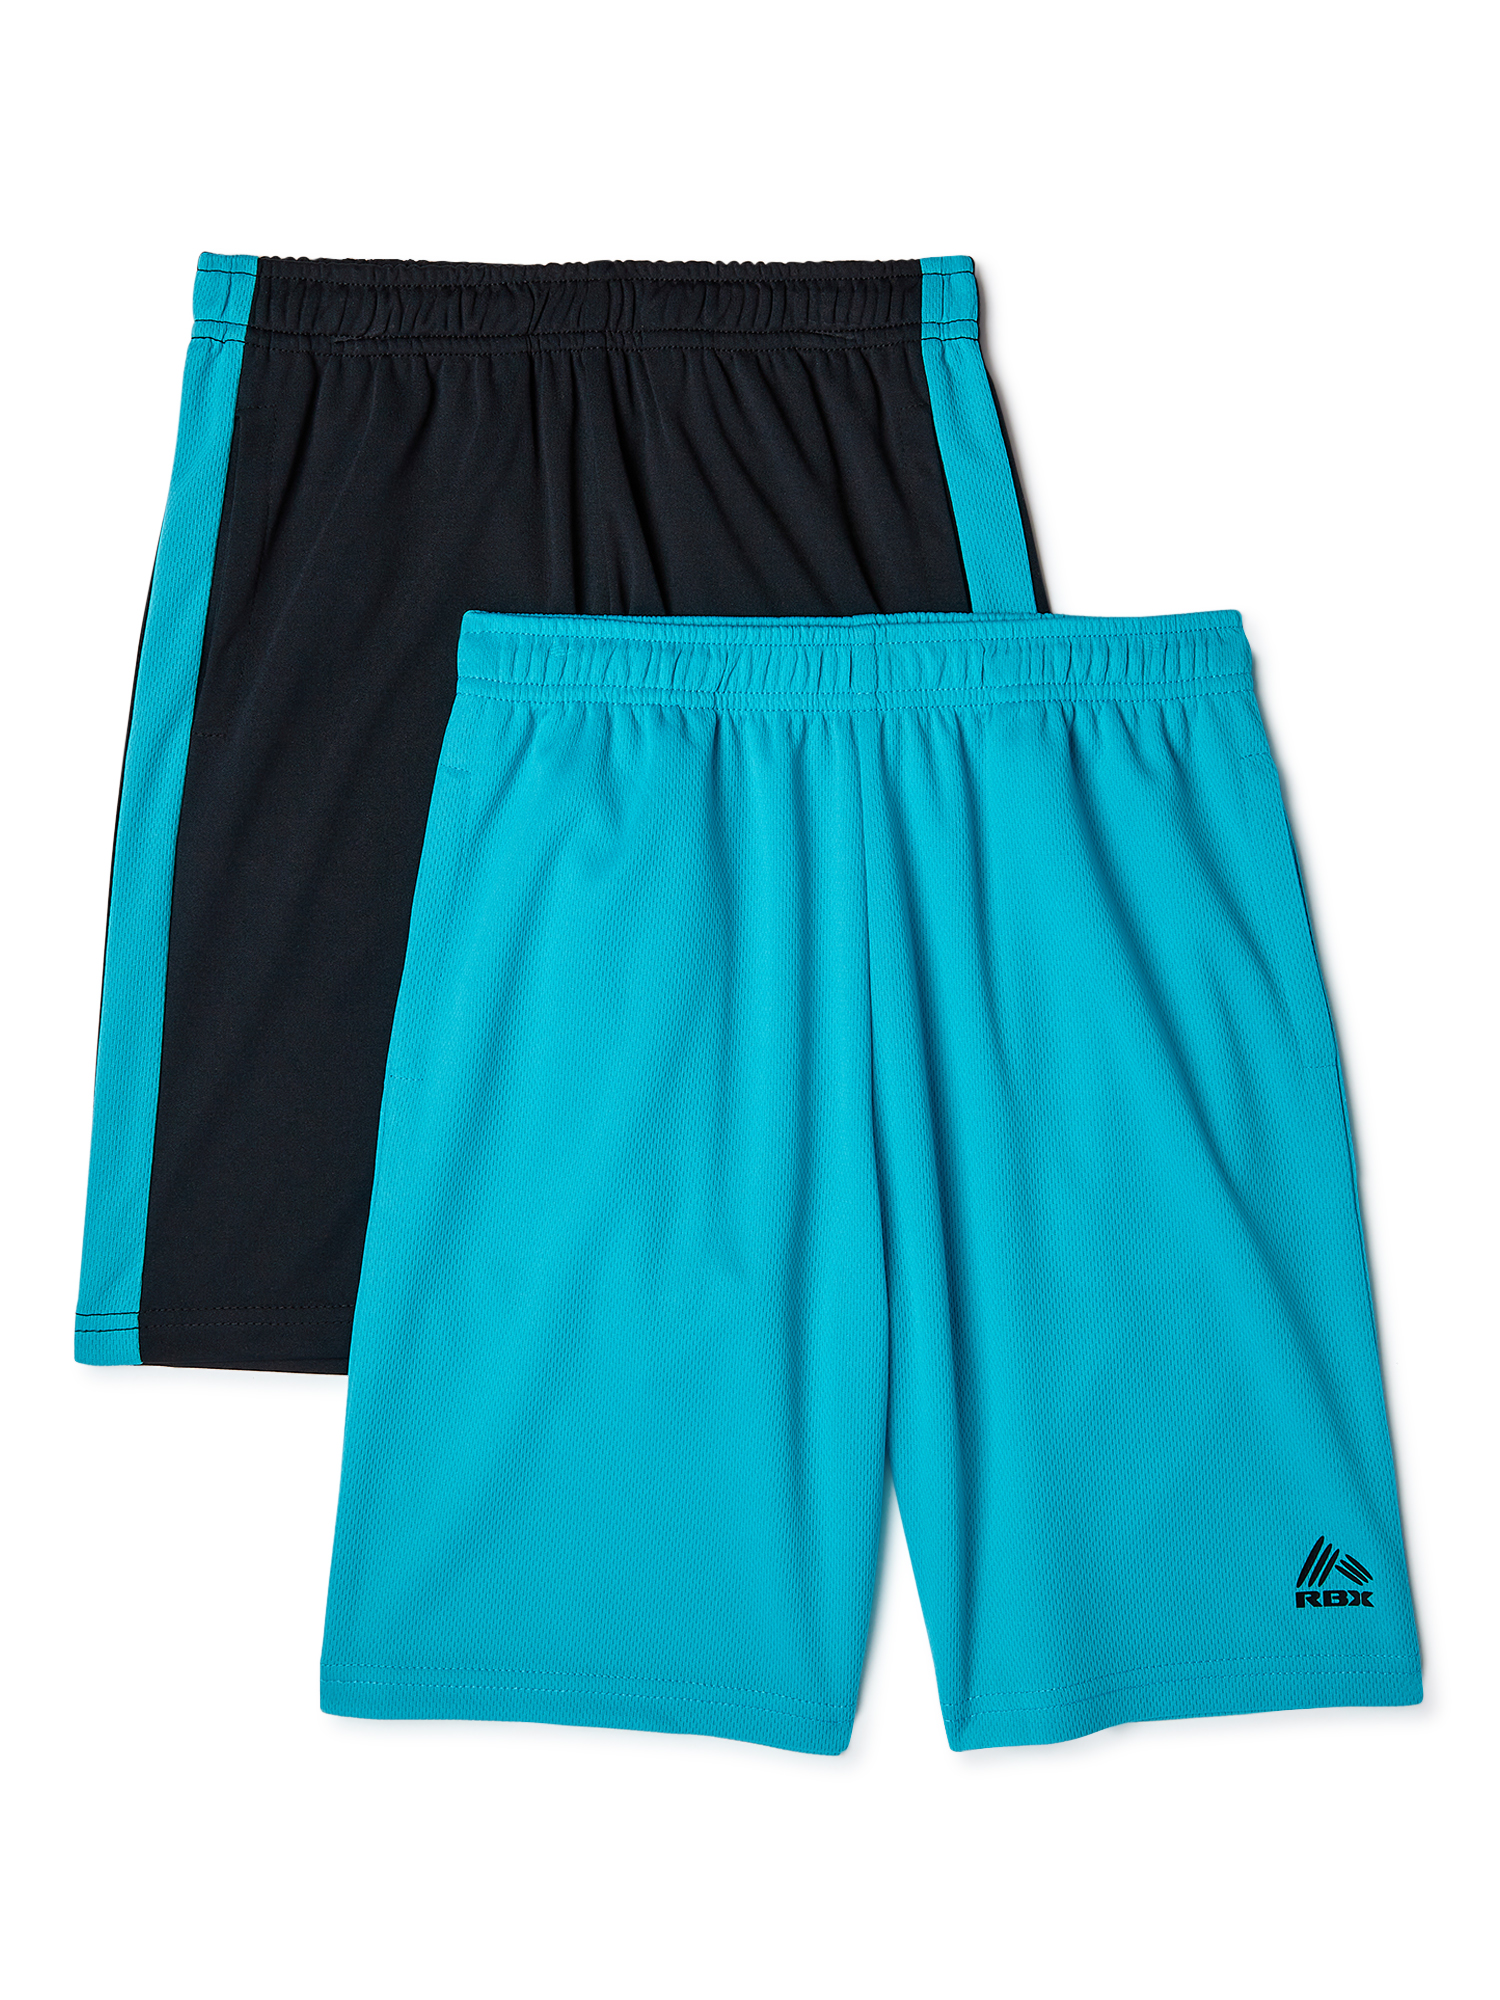 RBX Boys Neon Performance Shorts, 2-Pack, Sizes 4-18 - image 1 of 3